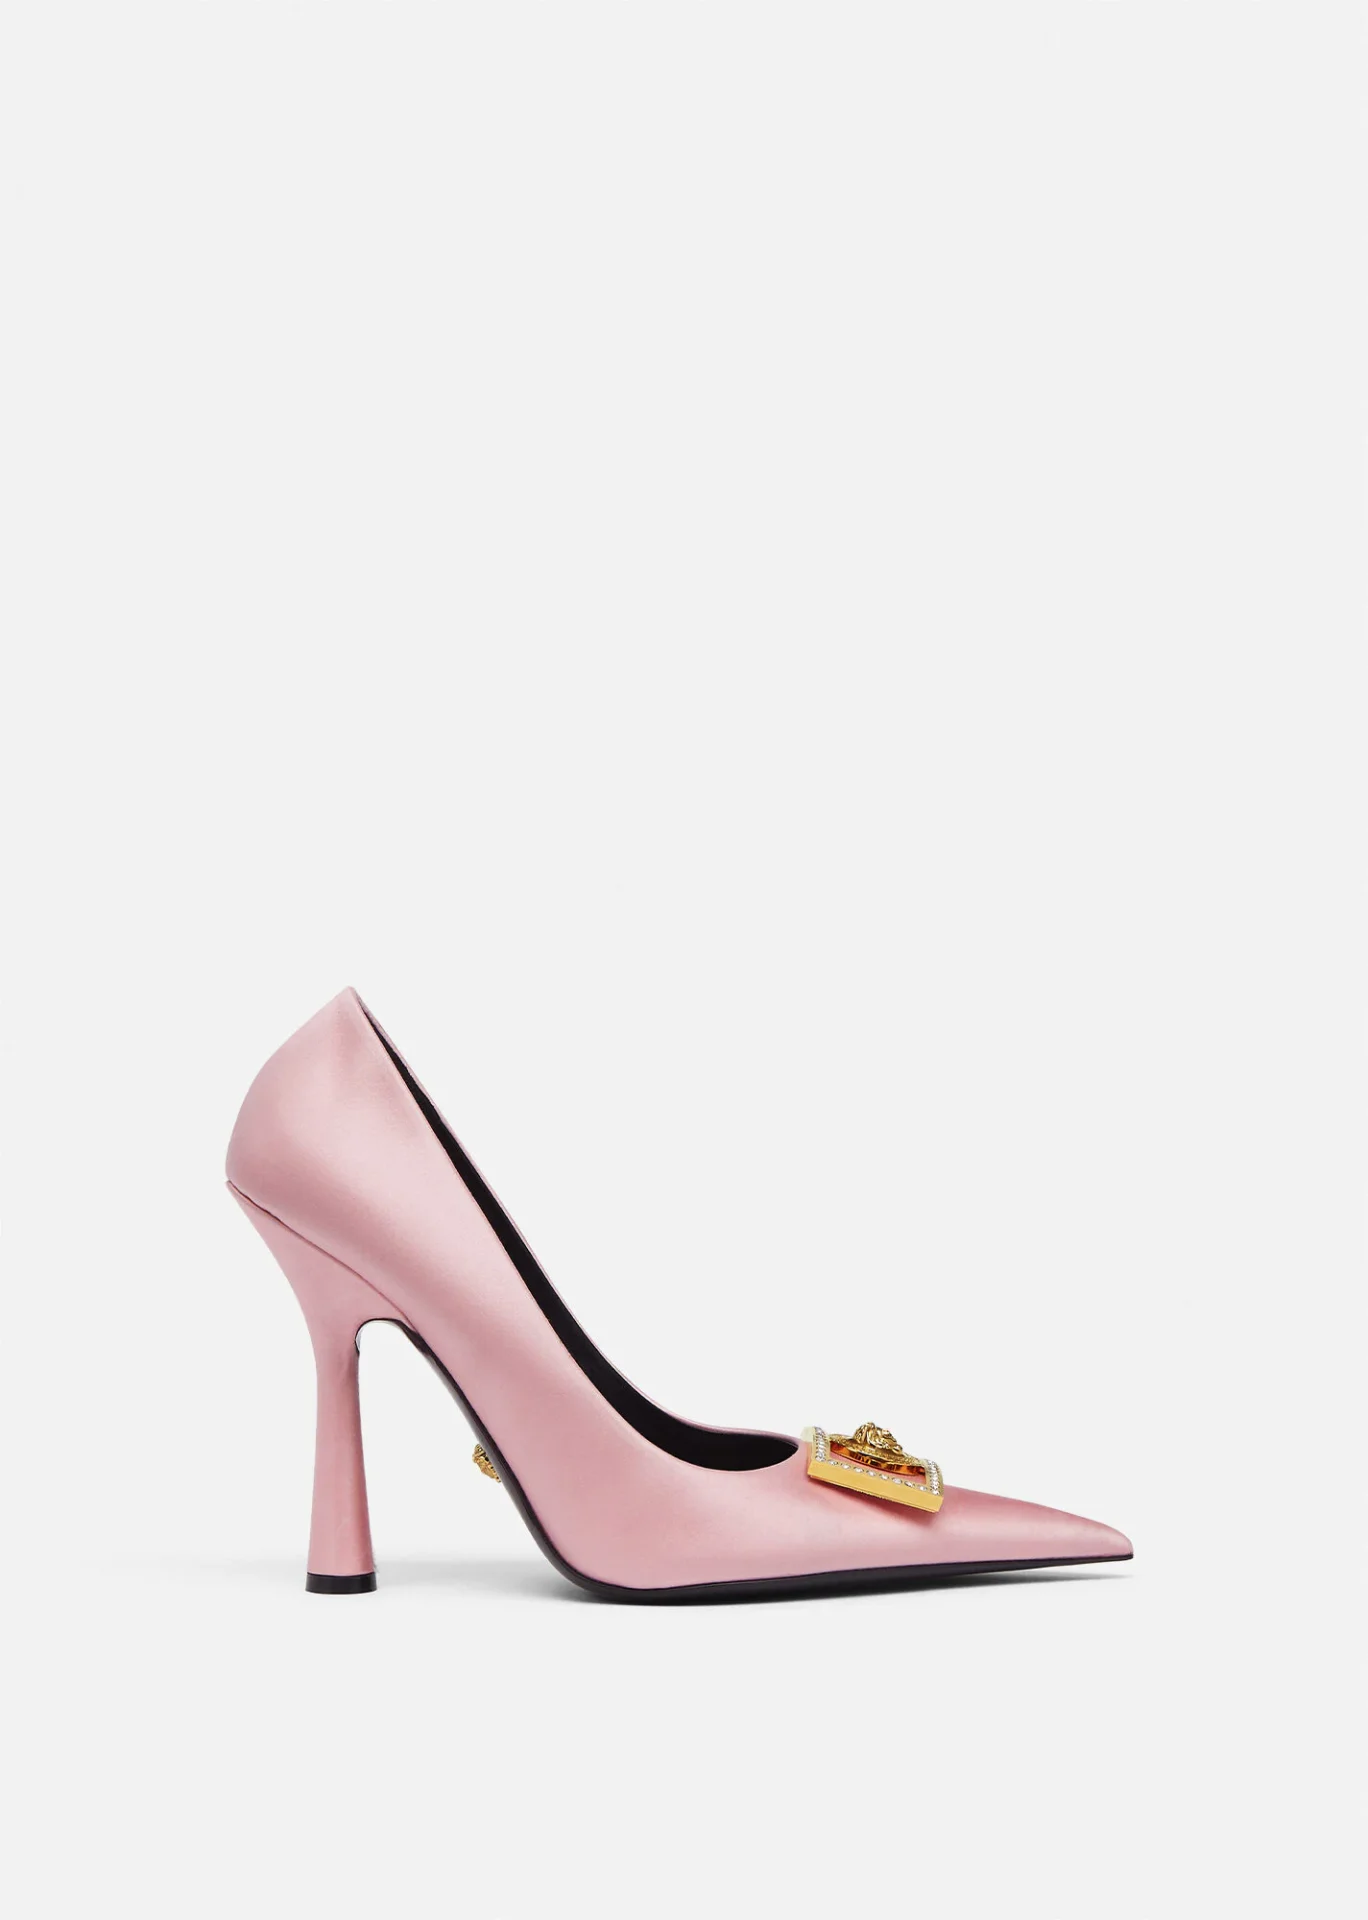 A pair of pink and golden crystal pumps